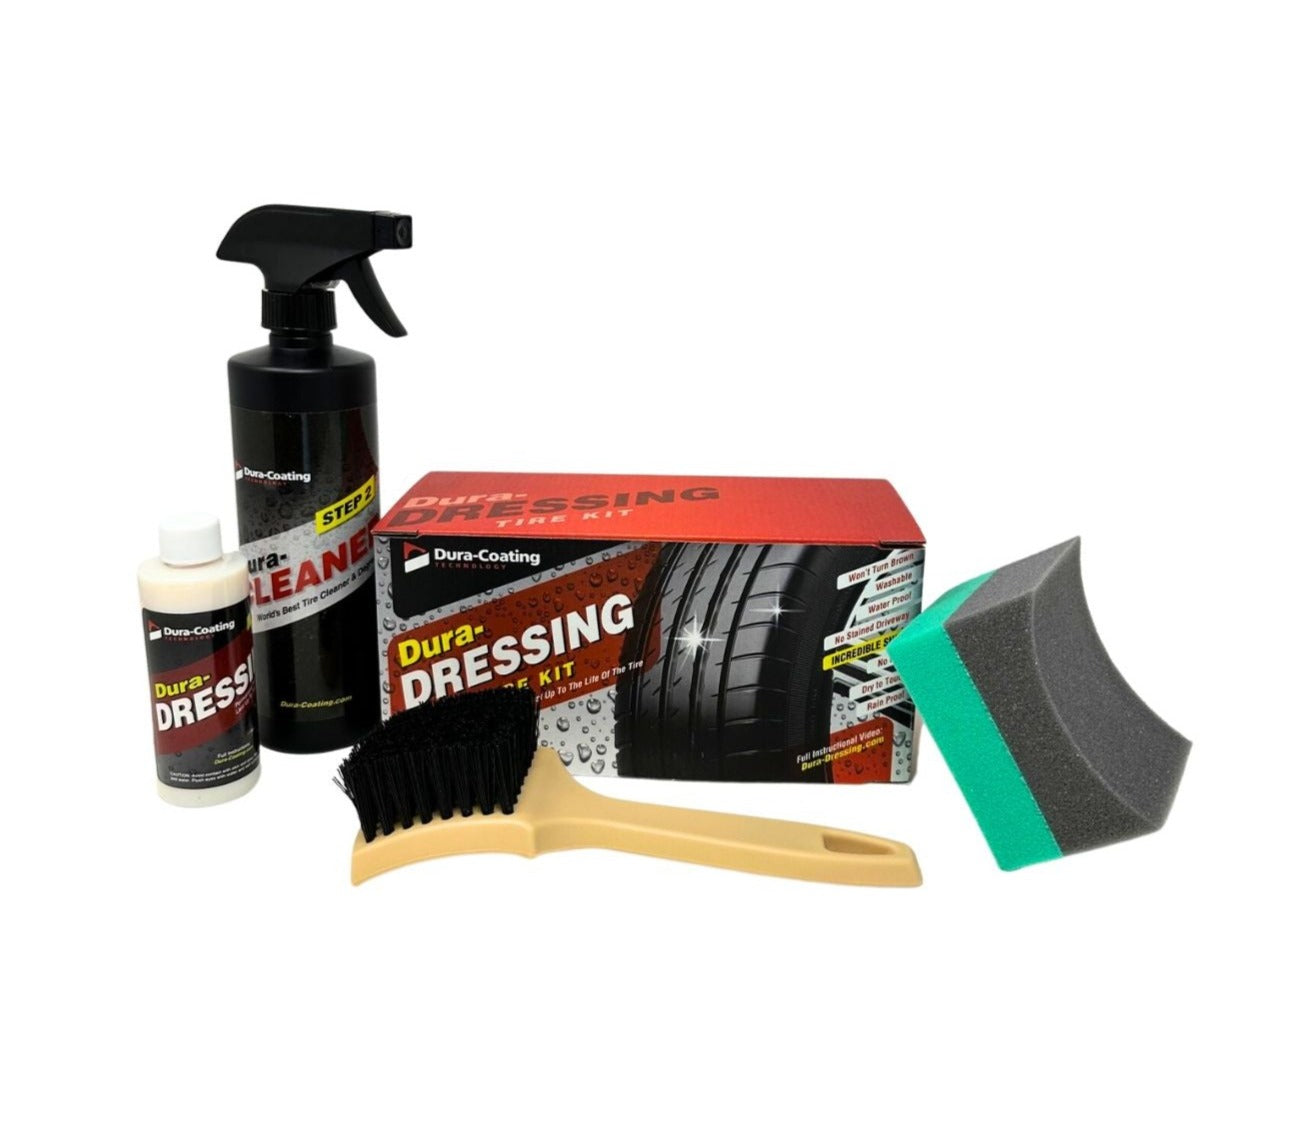 Dura-Dressing Total Tire Kit - Single Size Car Kit - Tire Dressing,  Cleaning and Restoration Kit for Cars - High Gloss Coating to Renew and  Protect